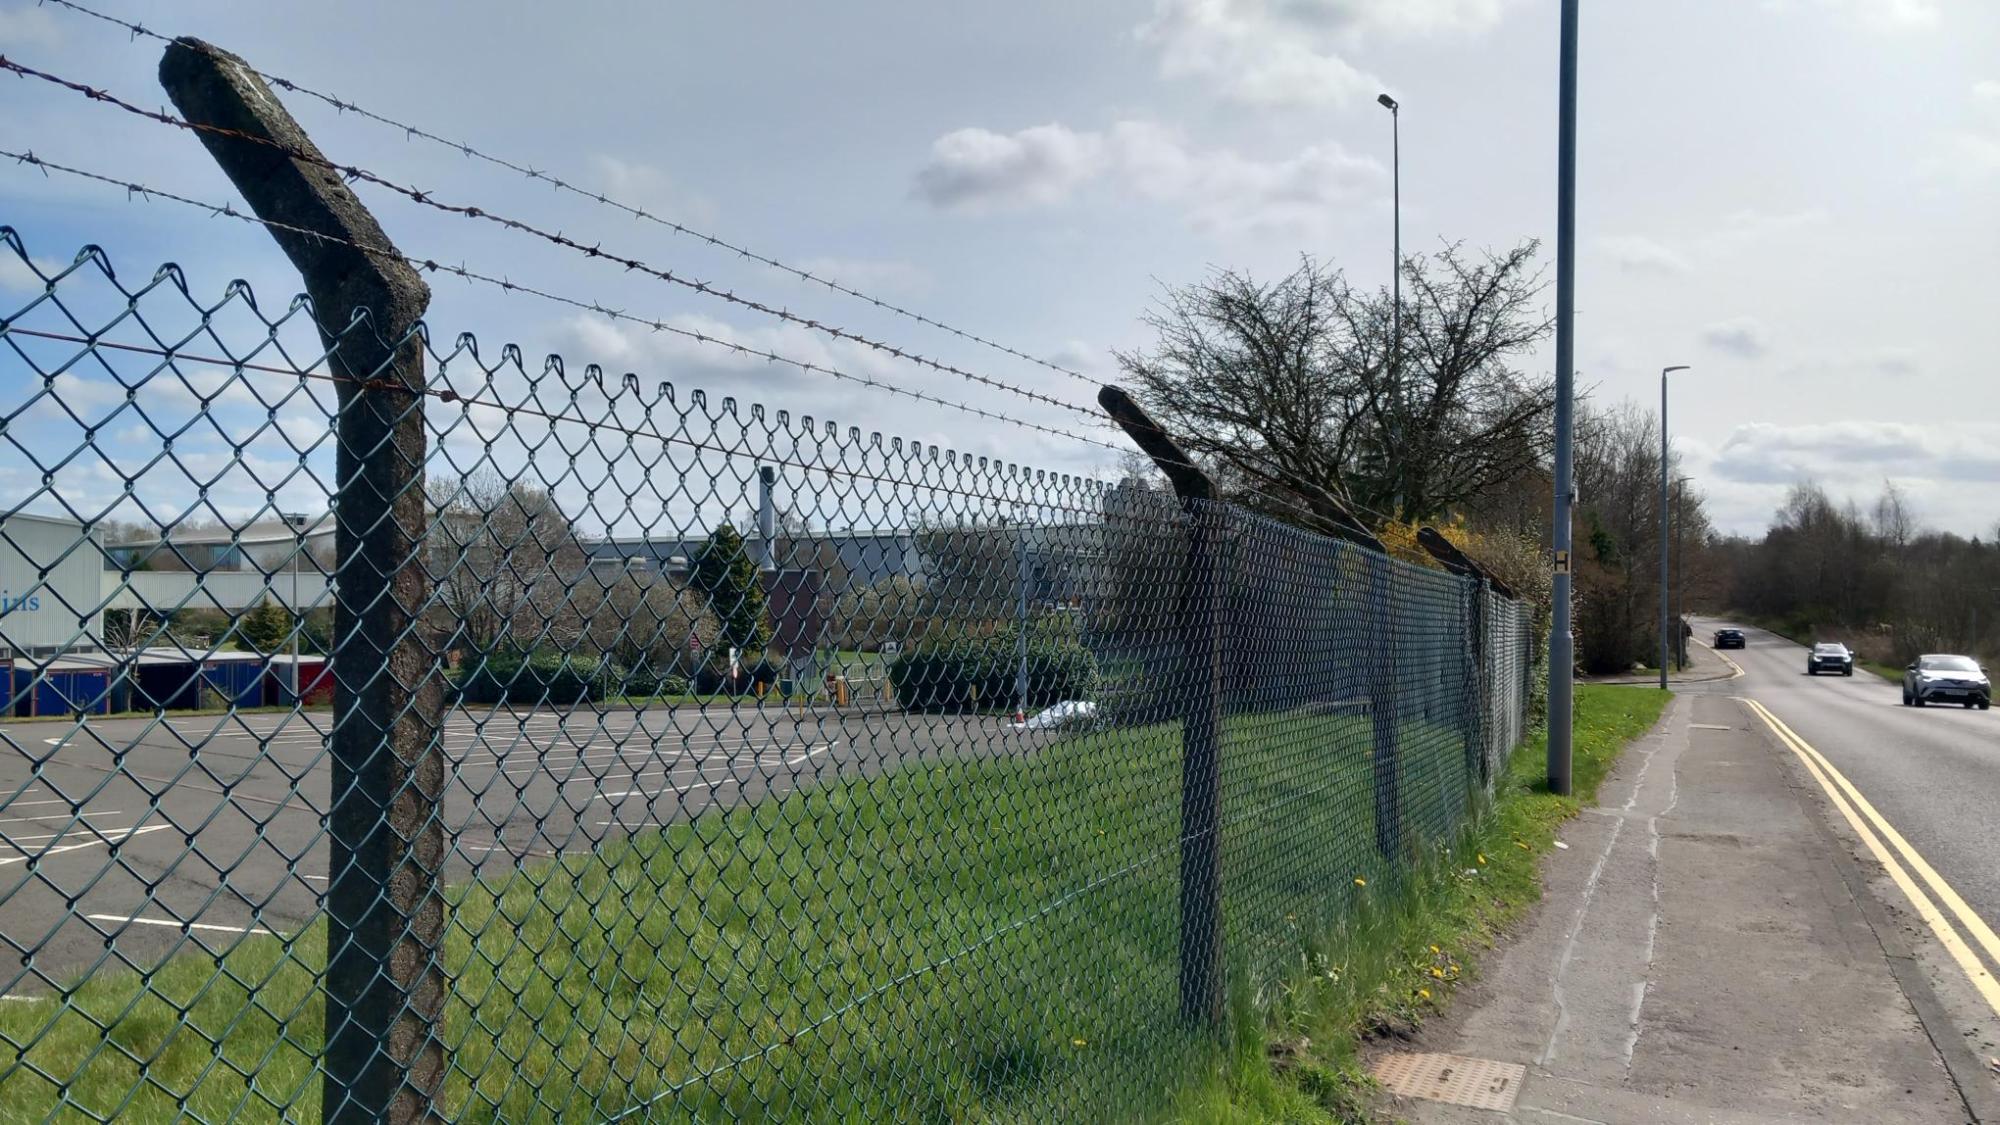 Westerhill - a fence with barbed wire and industrial units beyond